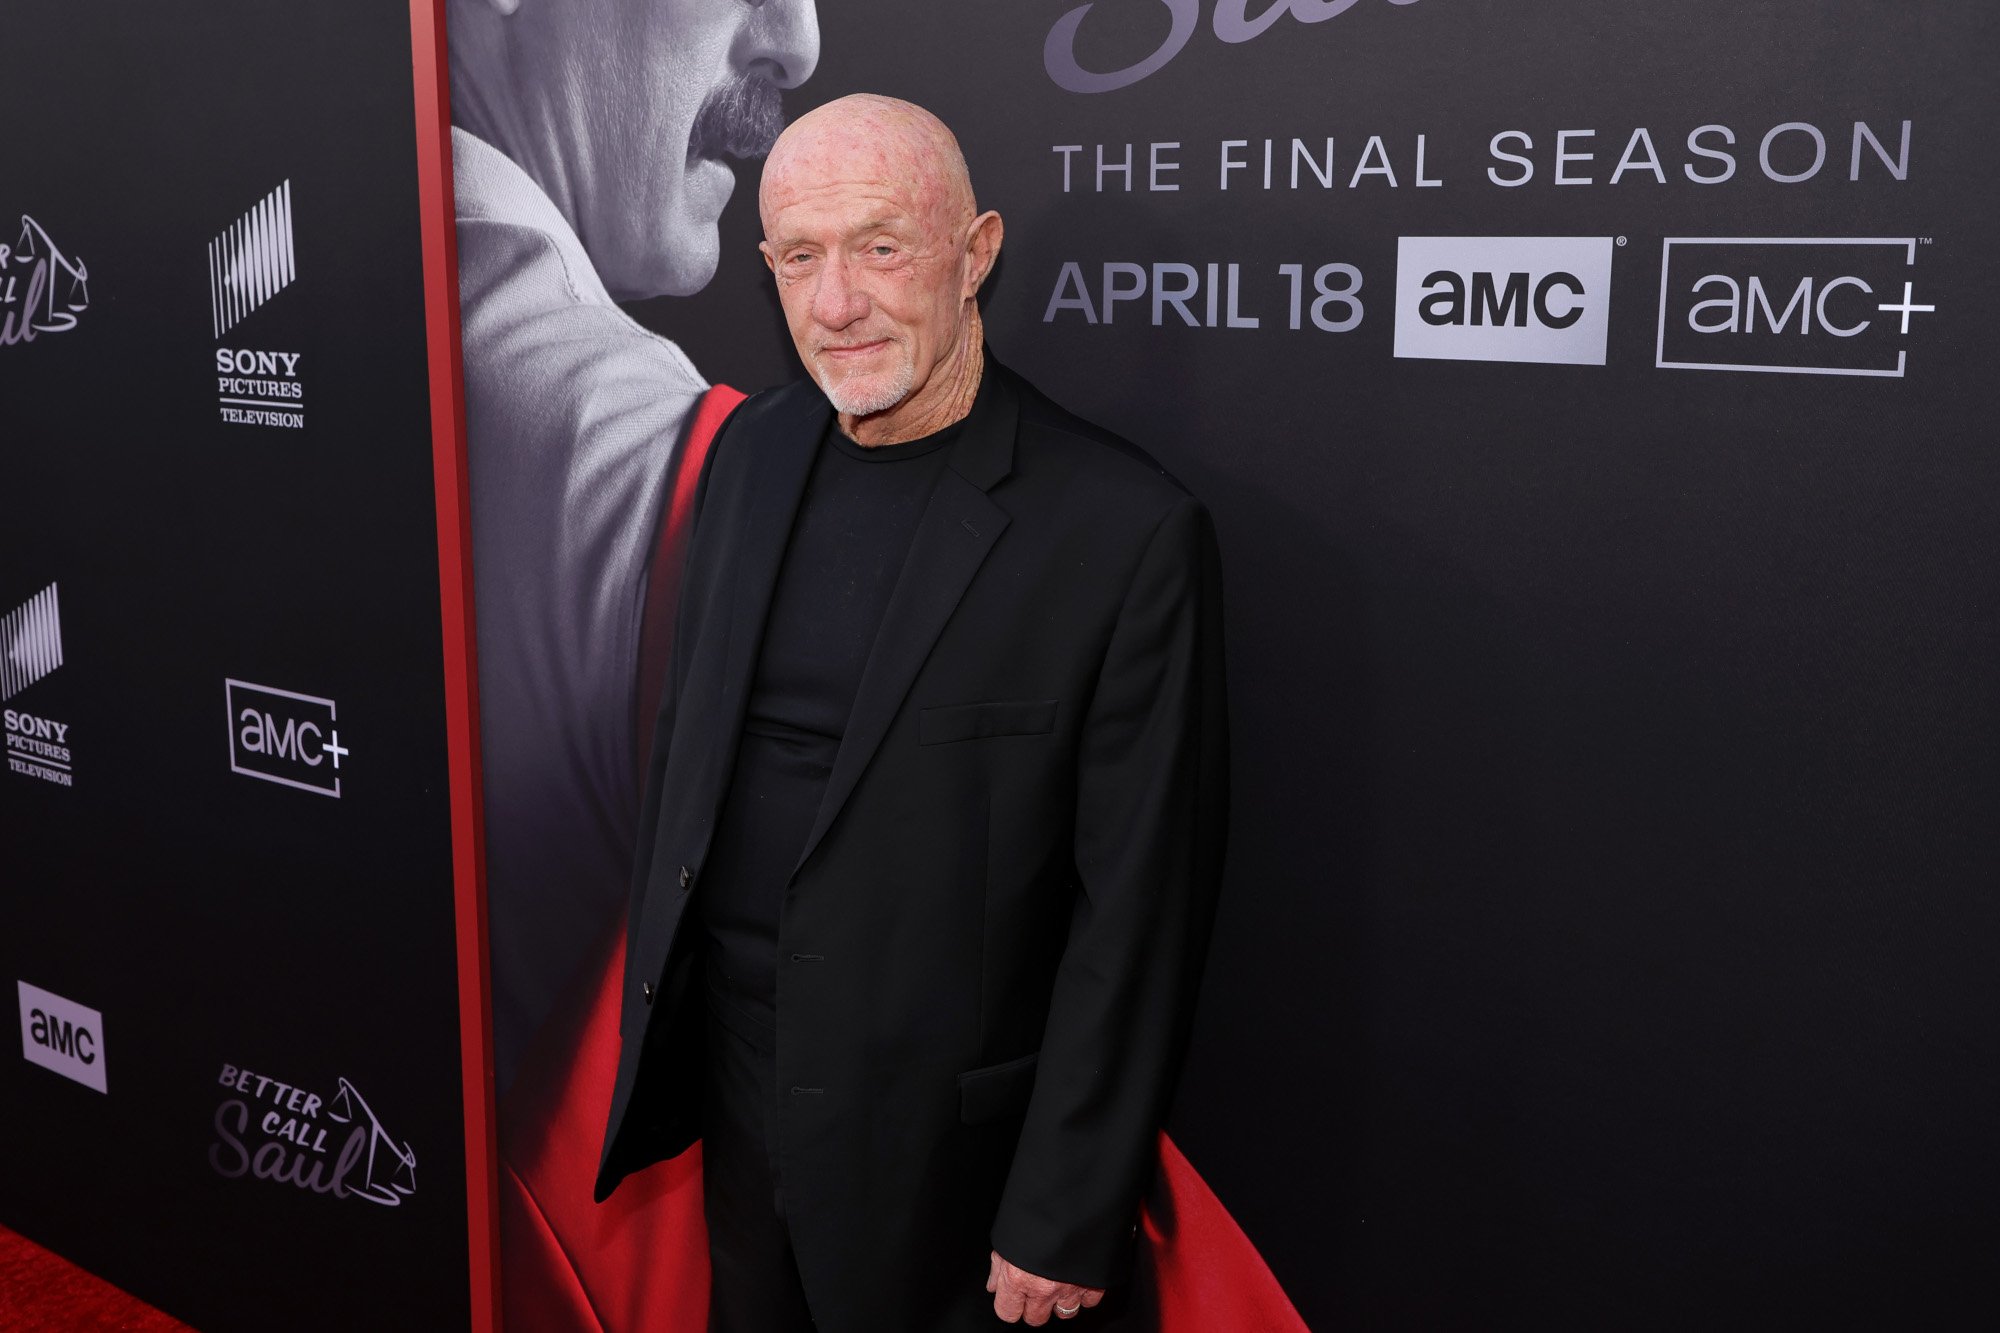 Jonathan Banks on the red carpet for the 'Better Call Saul' premiere. He's wearing a black suit and standing in front of a wall promoting the final season.